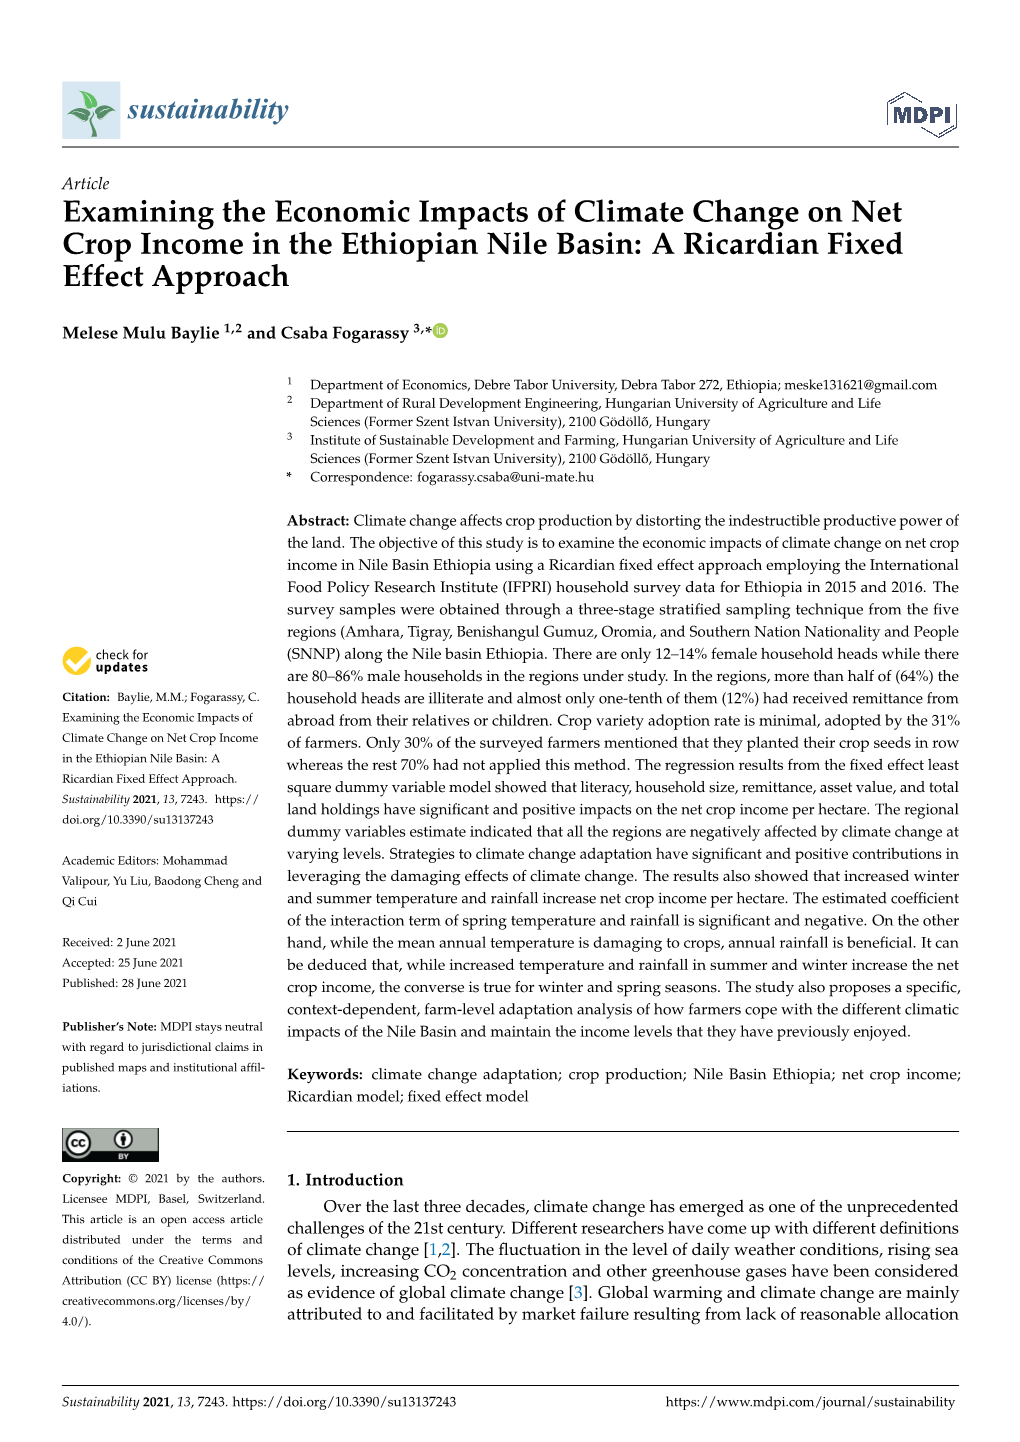 Examining the Economic Impacts of Climate Change on Net Crop Income in the Ethiopian Nile Basin: a Ricardian Fixed Effect Approach